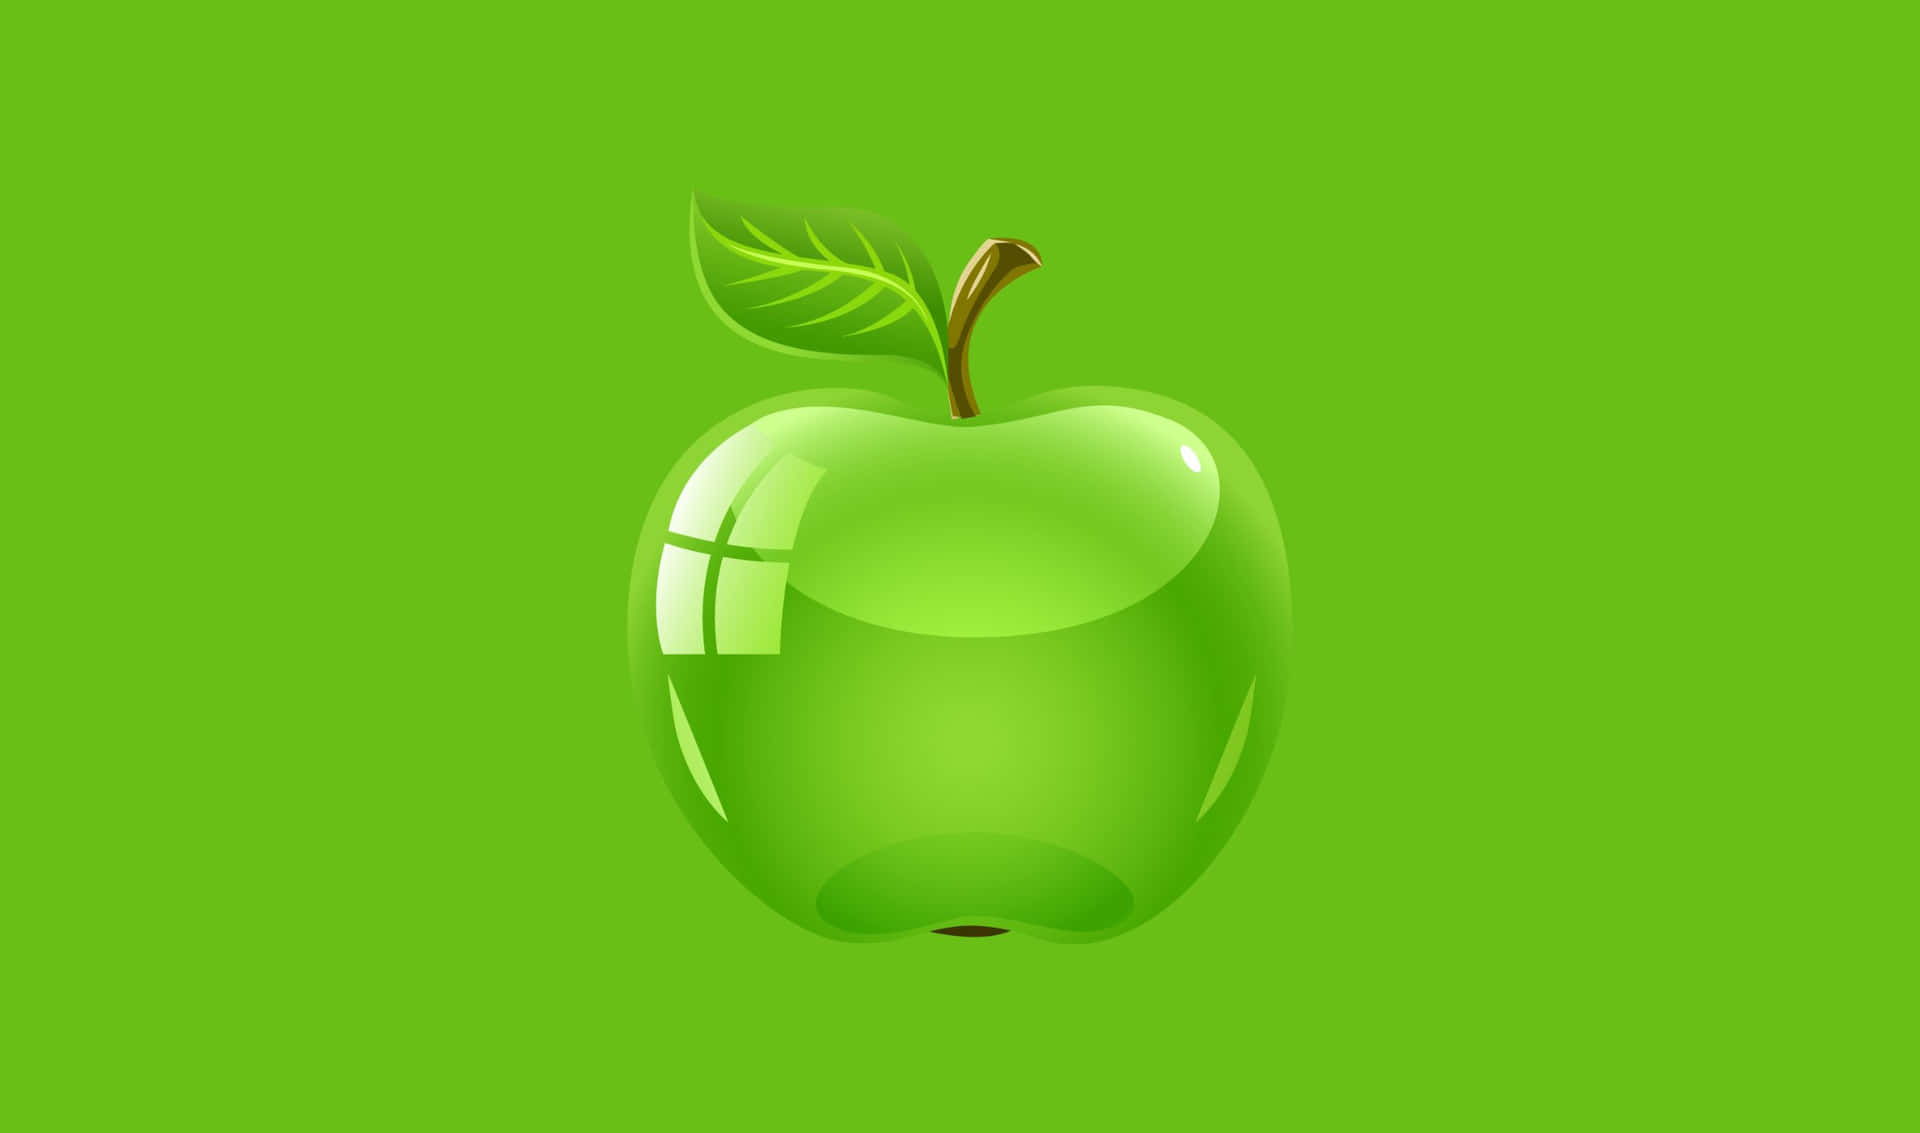 2440x1440 Glossy Green Apple Background